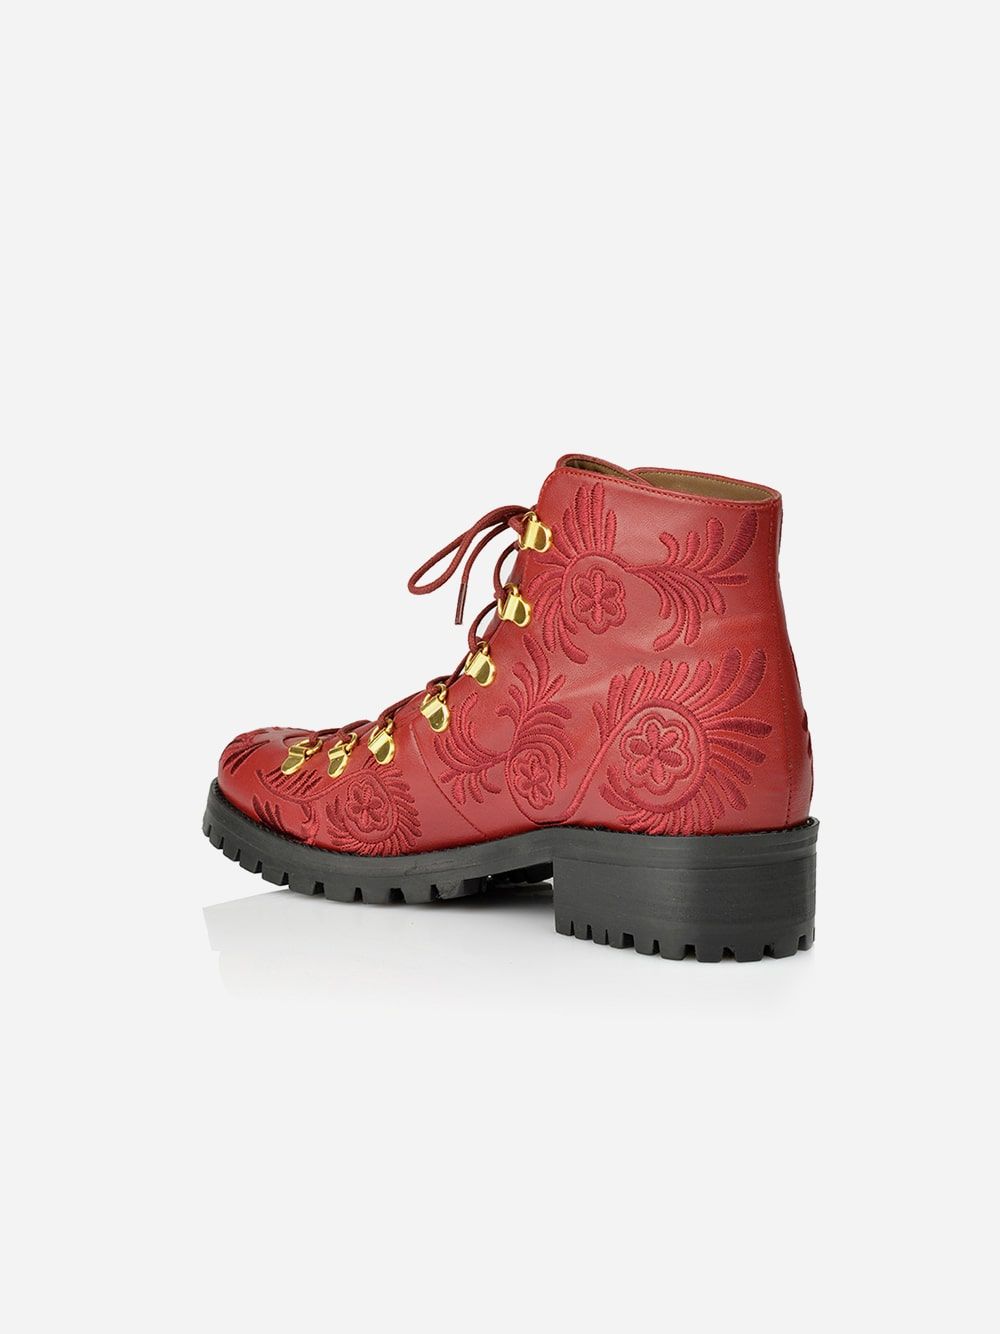 Cherry Embroidery Boots | JJ Heitor